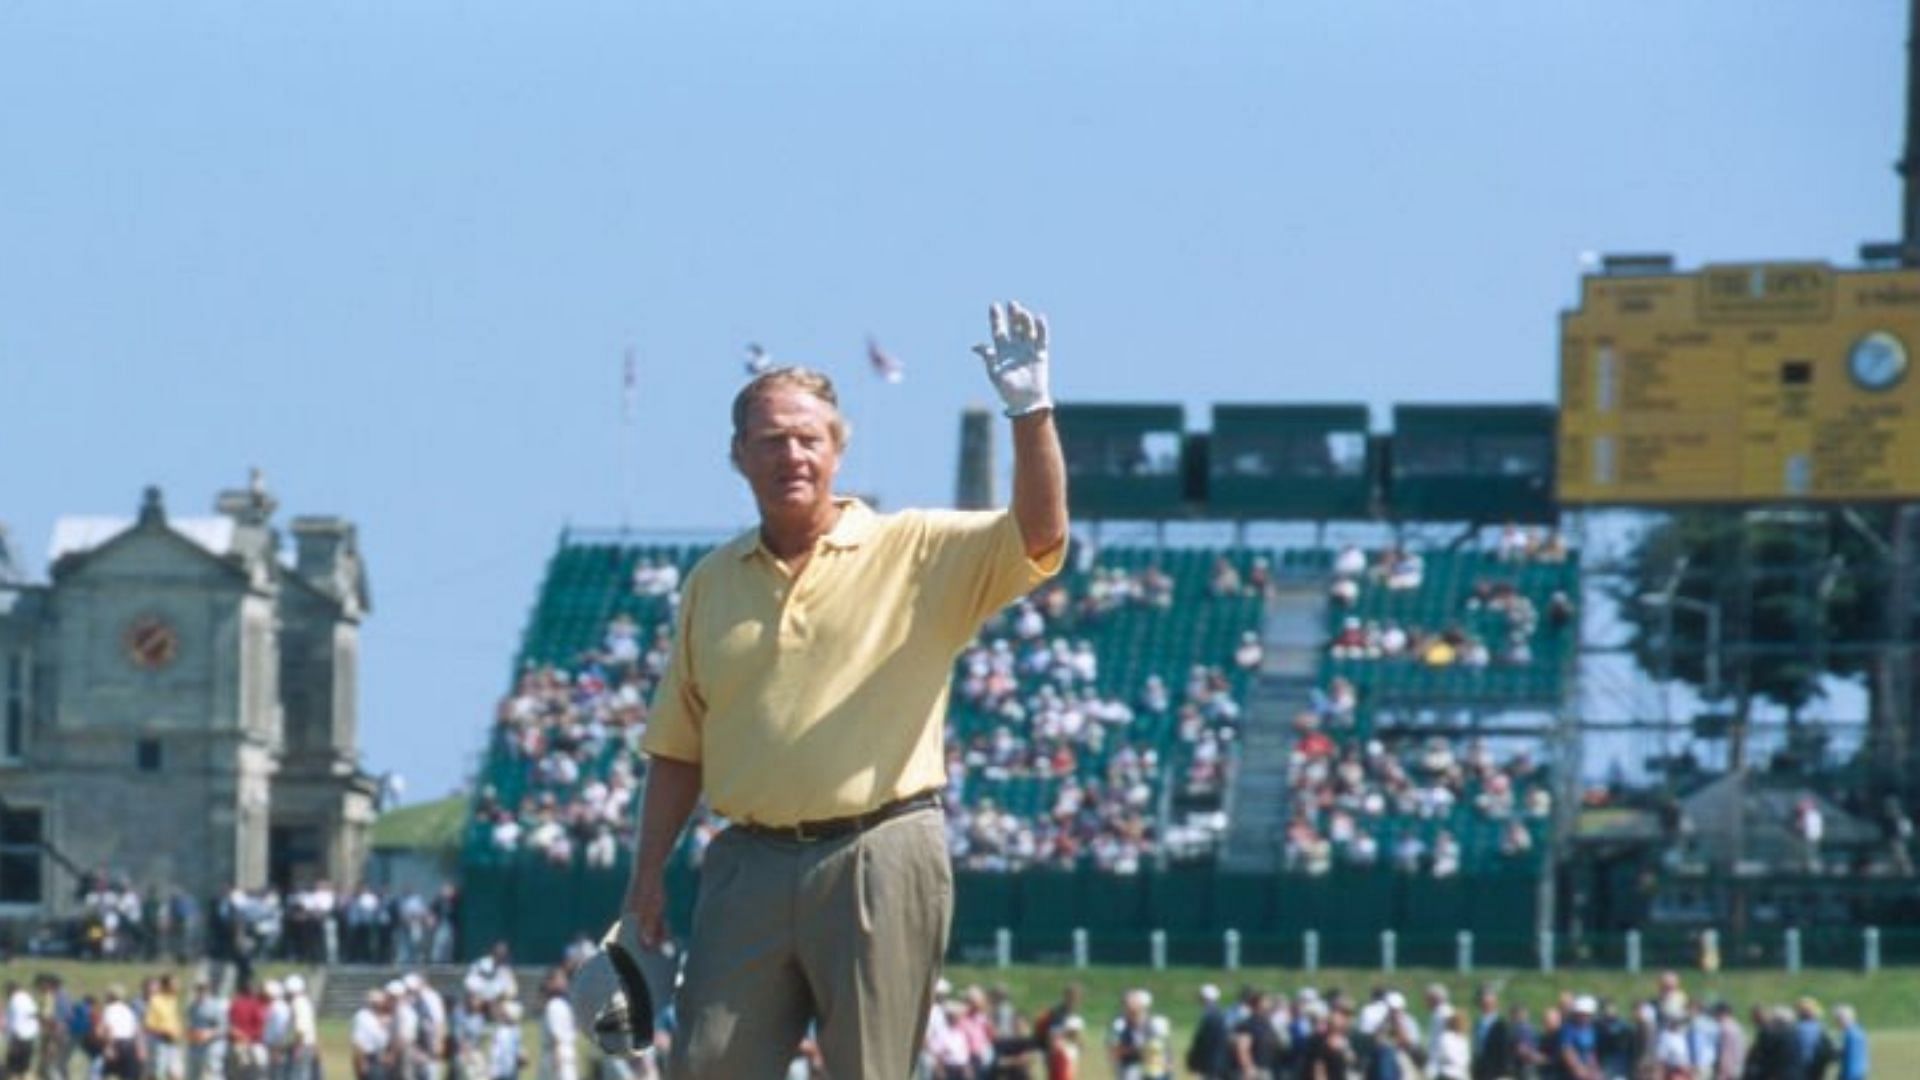 Jack Nicklaus at the Masters (Image via Getty)